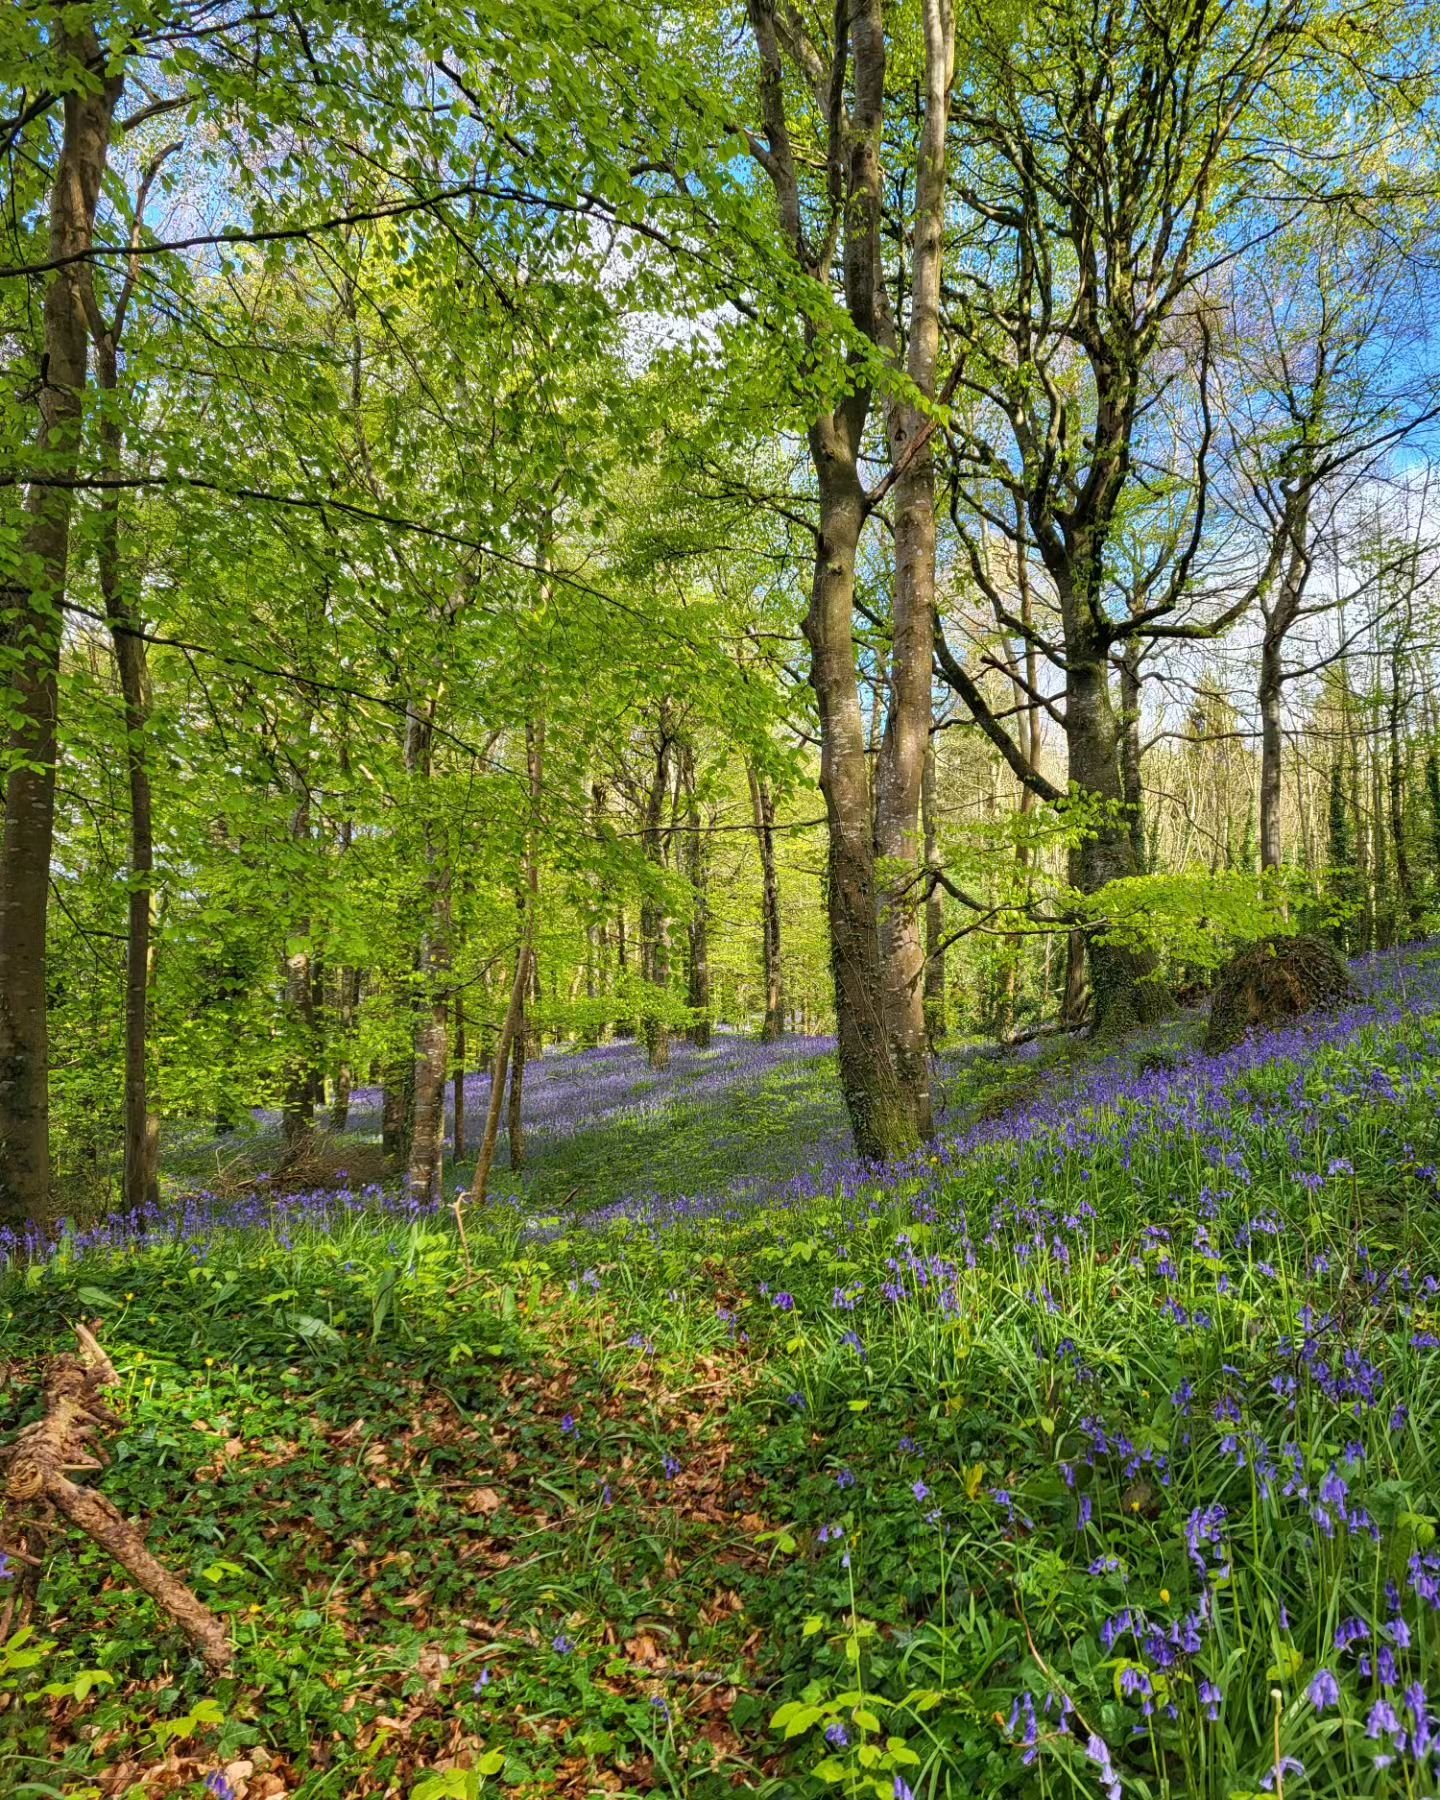 💜The magic of the Bluebell Woodland deserves to have a permanent spot on the grid!

💜I'm so lucky to have this, quite literally, on my doorstep, and I don't ever take it for granted. To spend time here at this time of the year is like being dropped